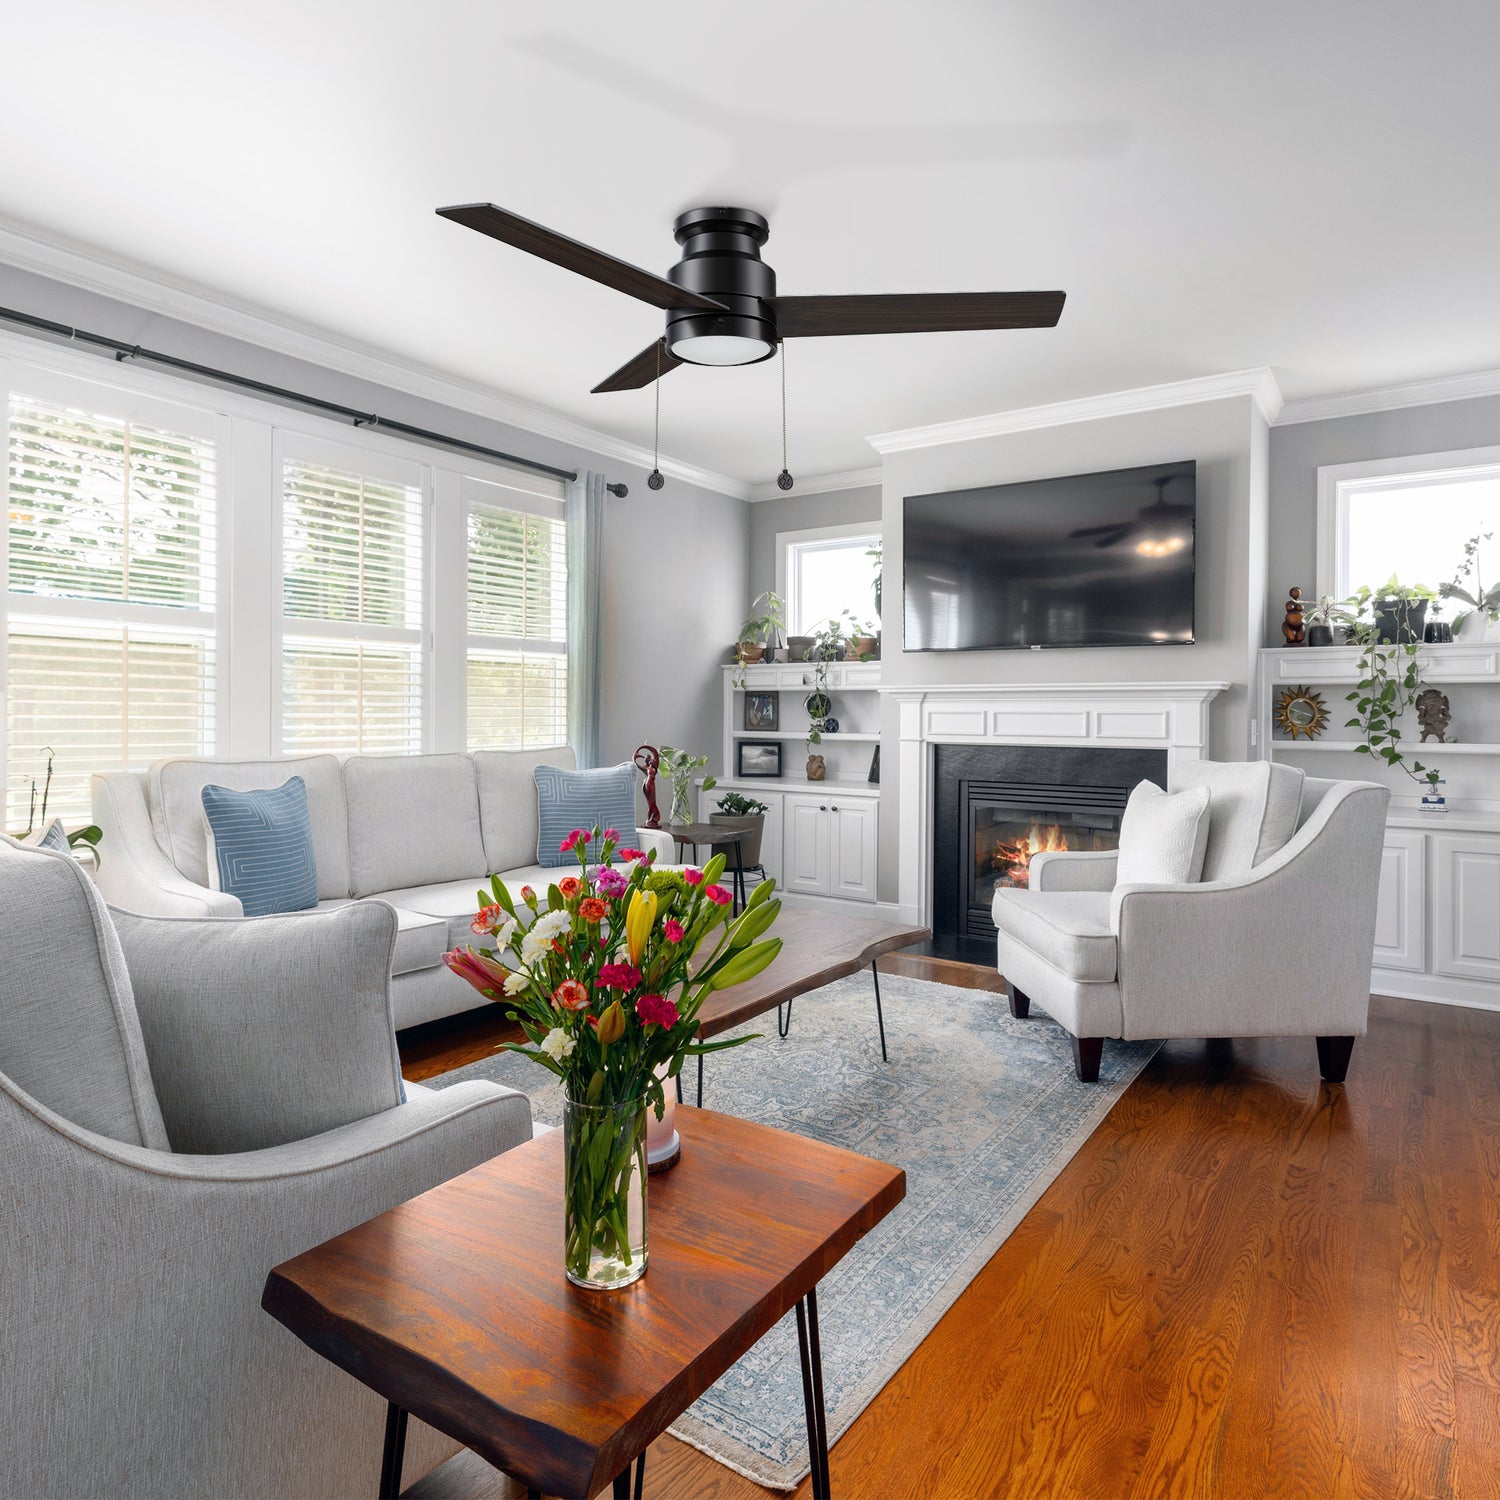 Black ceiling fan with flush mounting design, matching to light grey sofa, dark wood grain coffee table, LCD TV and stylish fireplace make the whole living room full of modern feeling. 